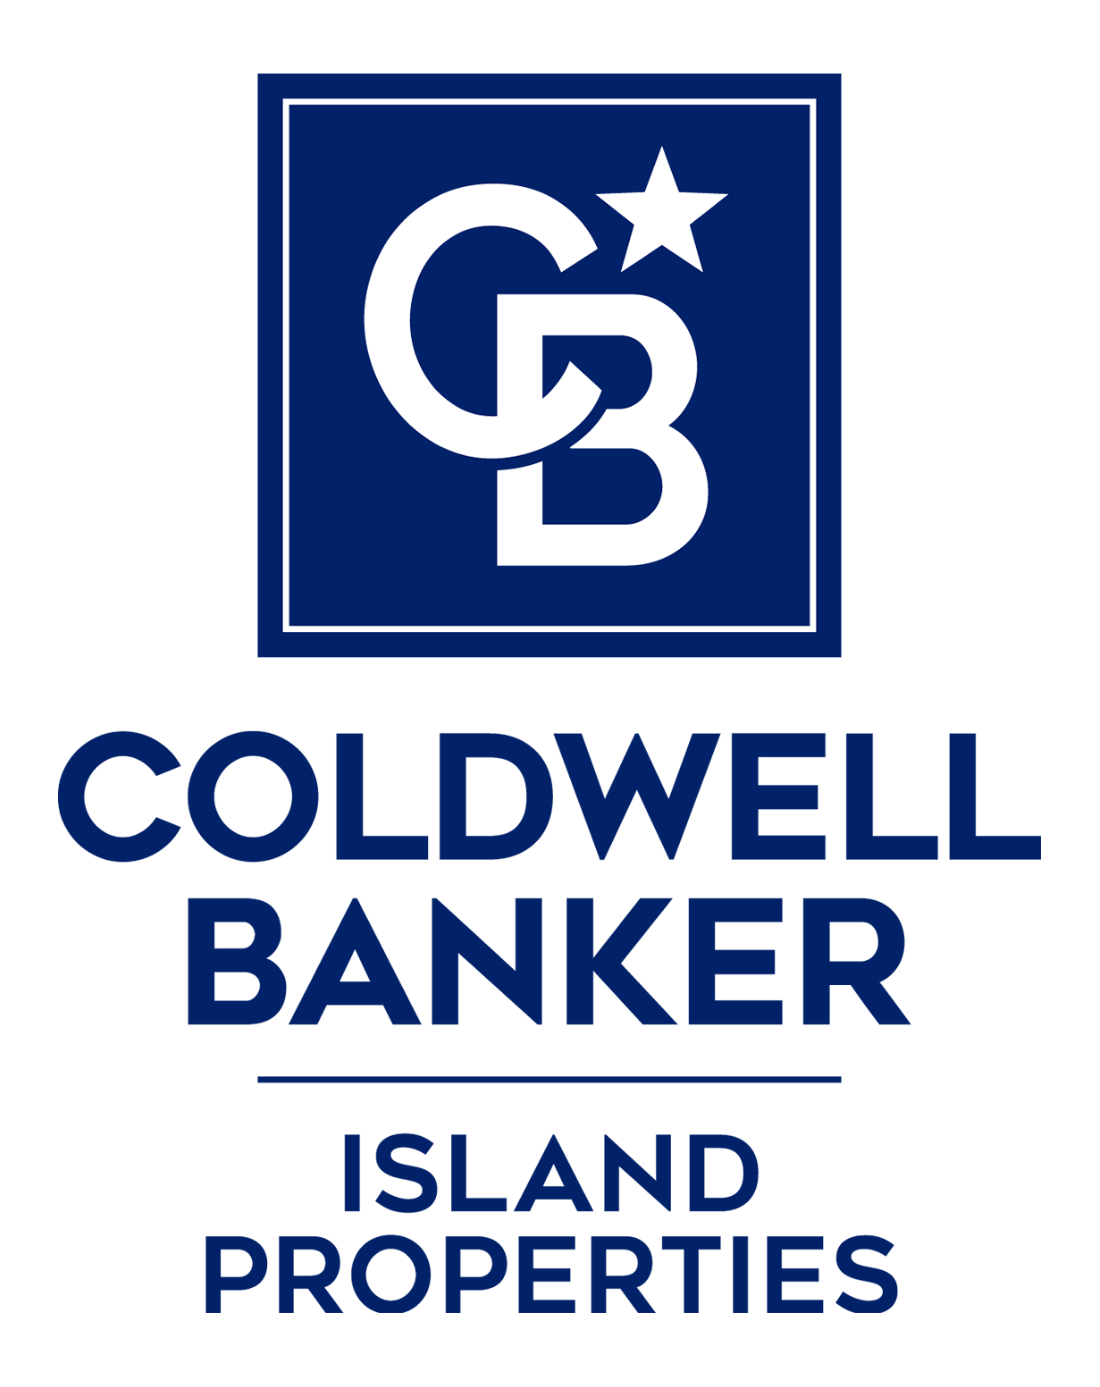 Terry Alling - Coldwell Banker Island Properties Logo